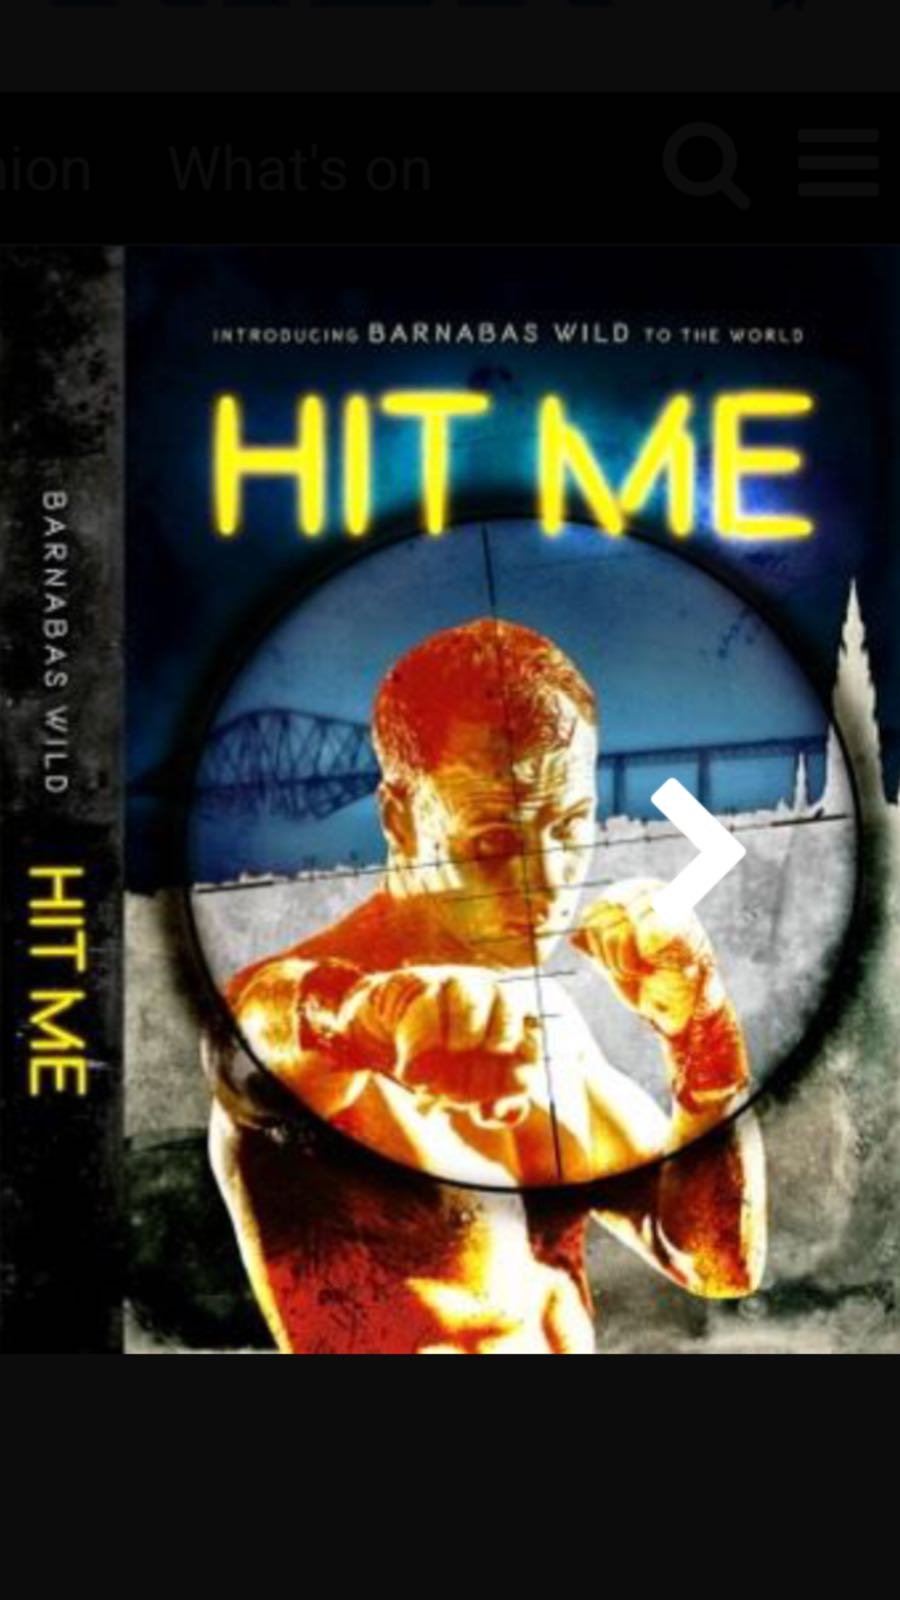 This is the official twitter account for Hit Me, a book that'll take you on a journey through Scotland's criminal underworld with Ex boxer Barnabas Wild.